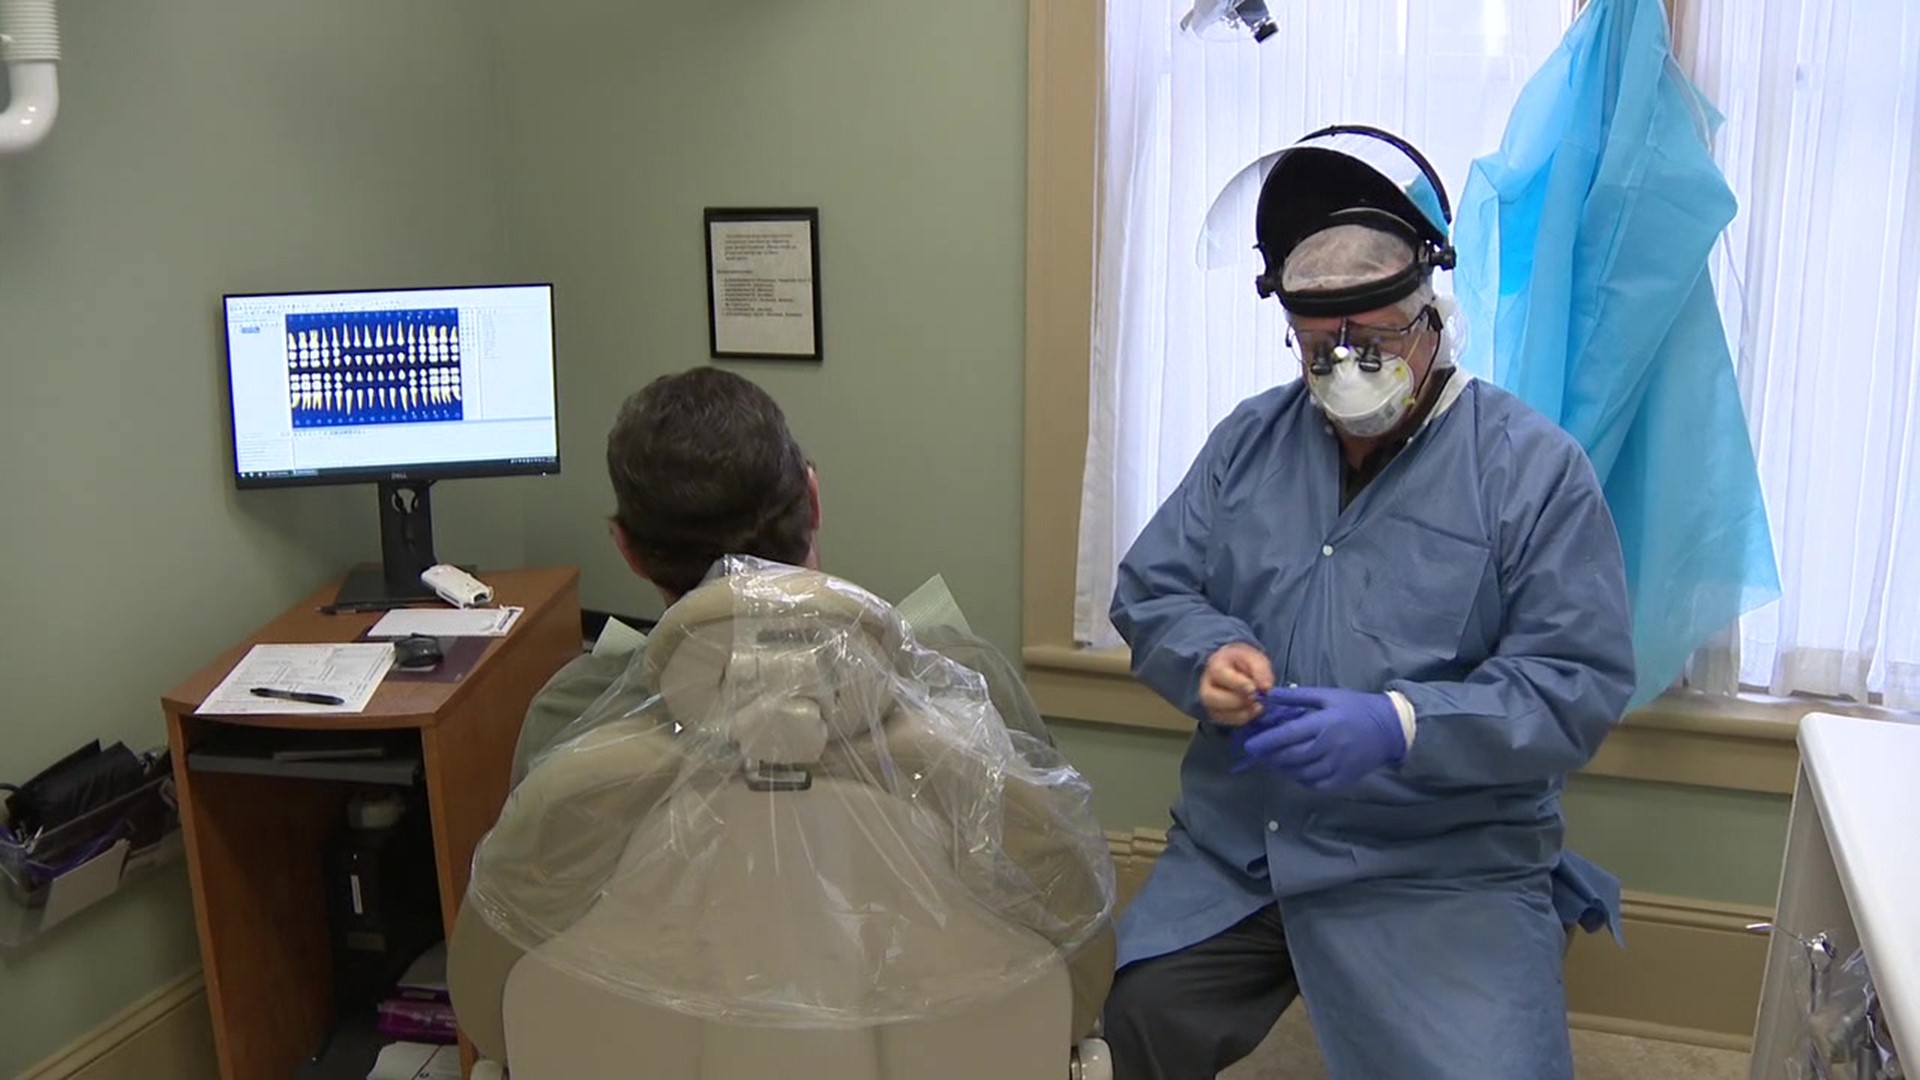 Dentists in Pennsylvania are once again allowed to perform non-emergency dental procedures, to an extent.